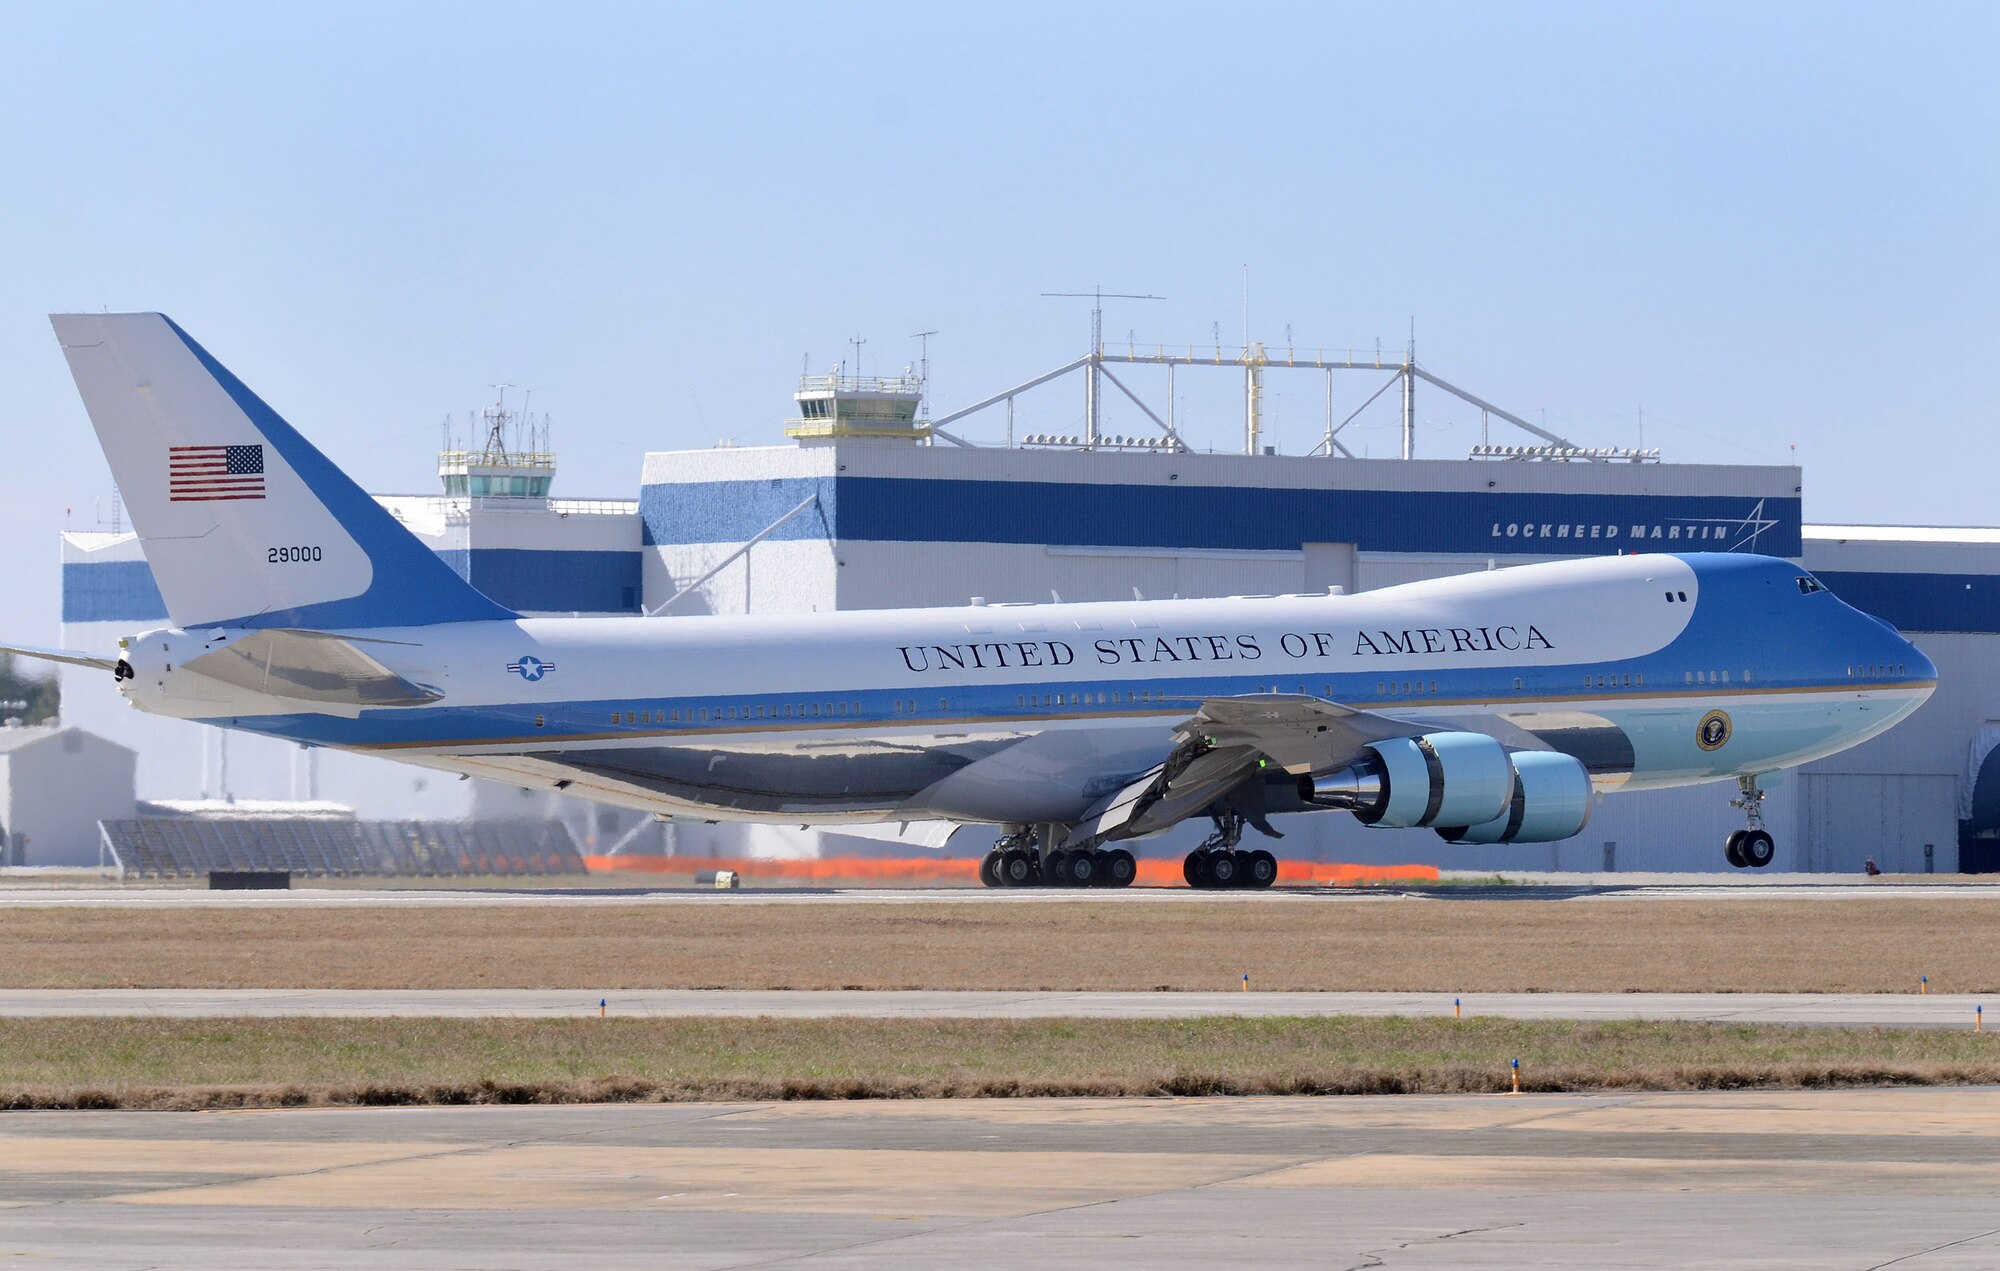 Air Force One arrives at Dobbins Air Reserve Base, Marietta, Ga., Feb. 14.  President Obama is going to the City of Decatur Recreation Center today to discuss proposals outlined in his state of the union speech.  (U.S. Air Force photo/ Brad Fallin)